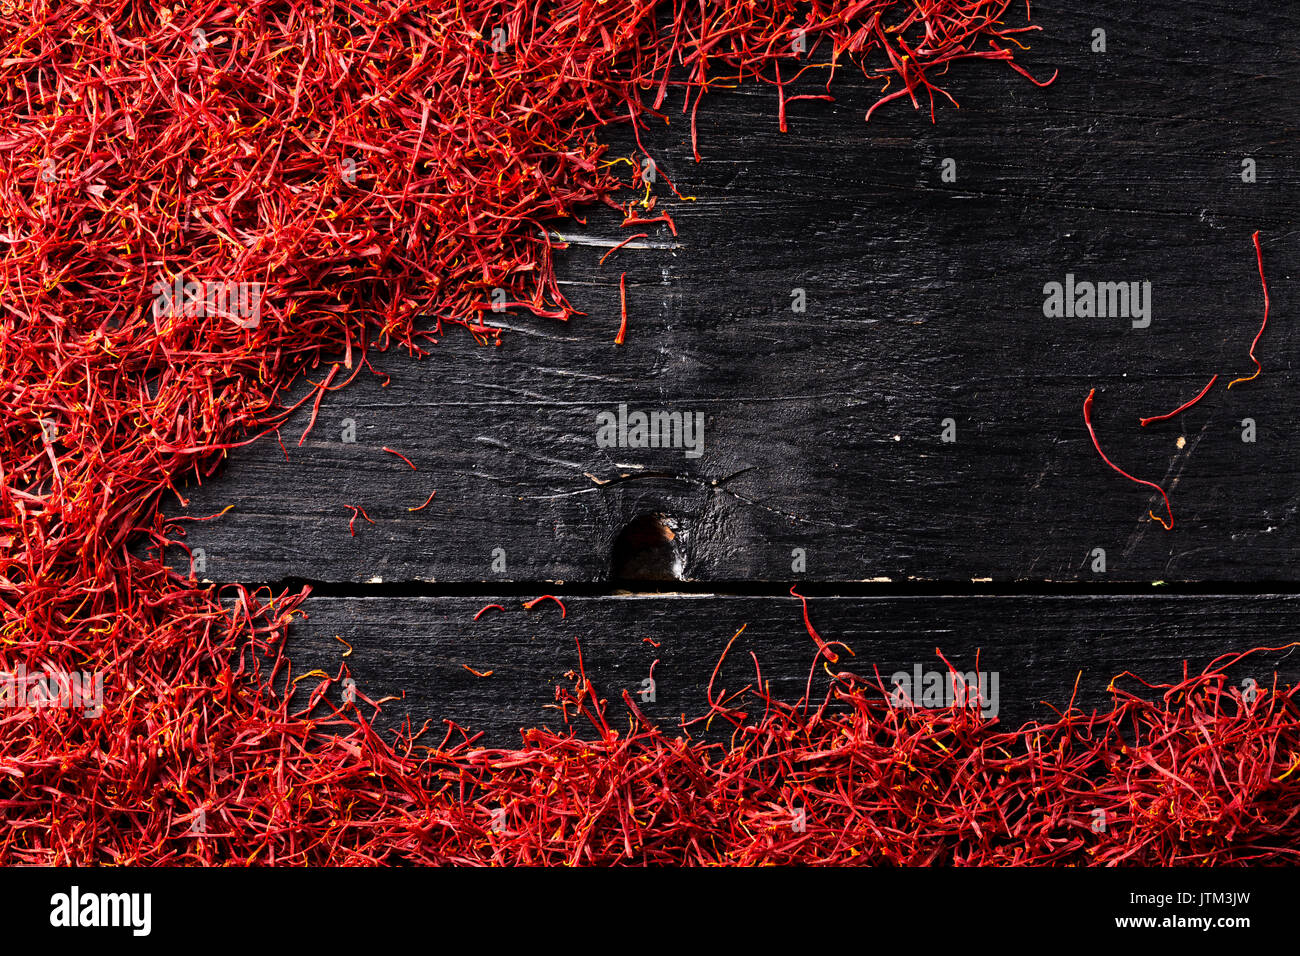 saffron crocus threads on black wooden background, full frame, view from above Stock Photo